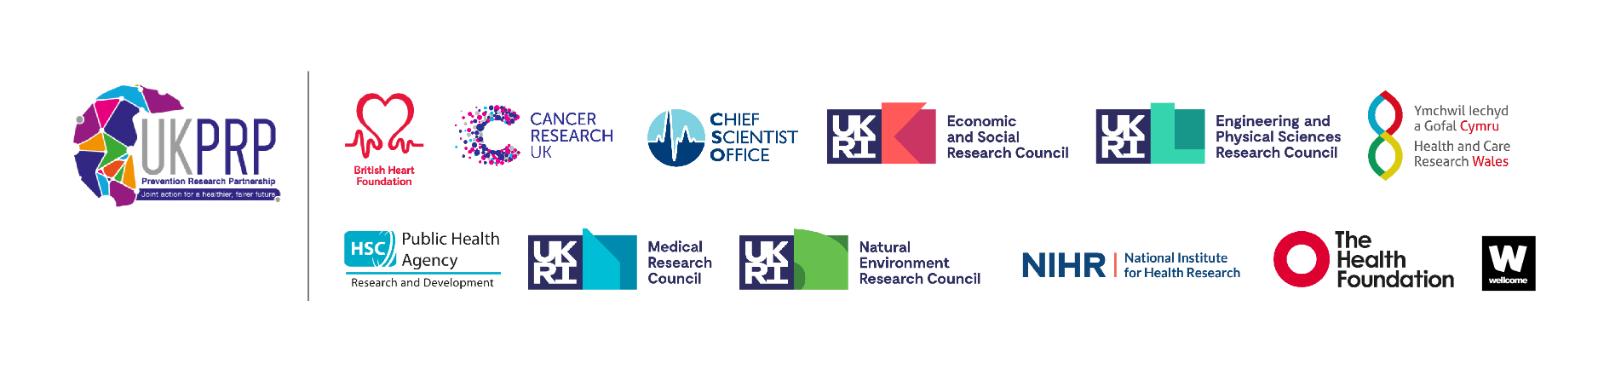 New UKPRP logo and funders